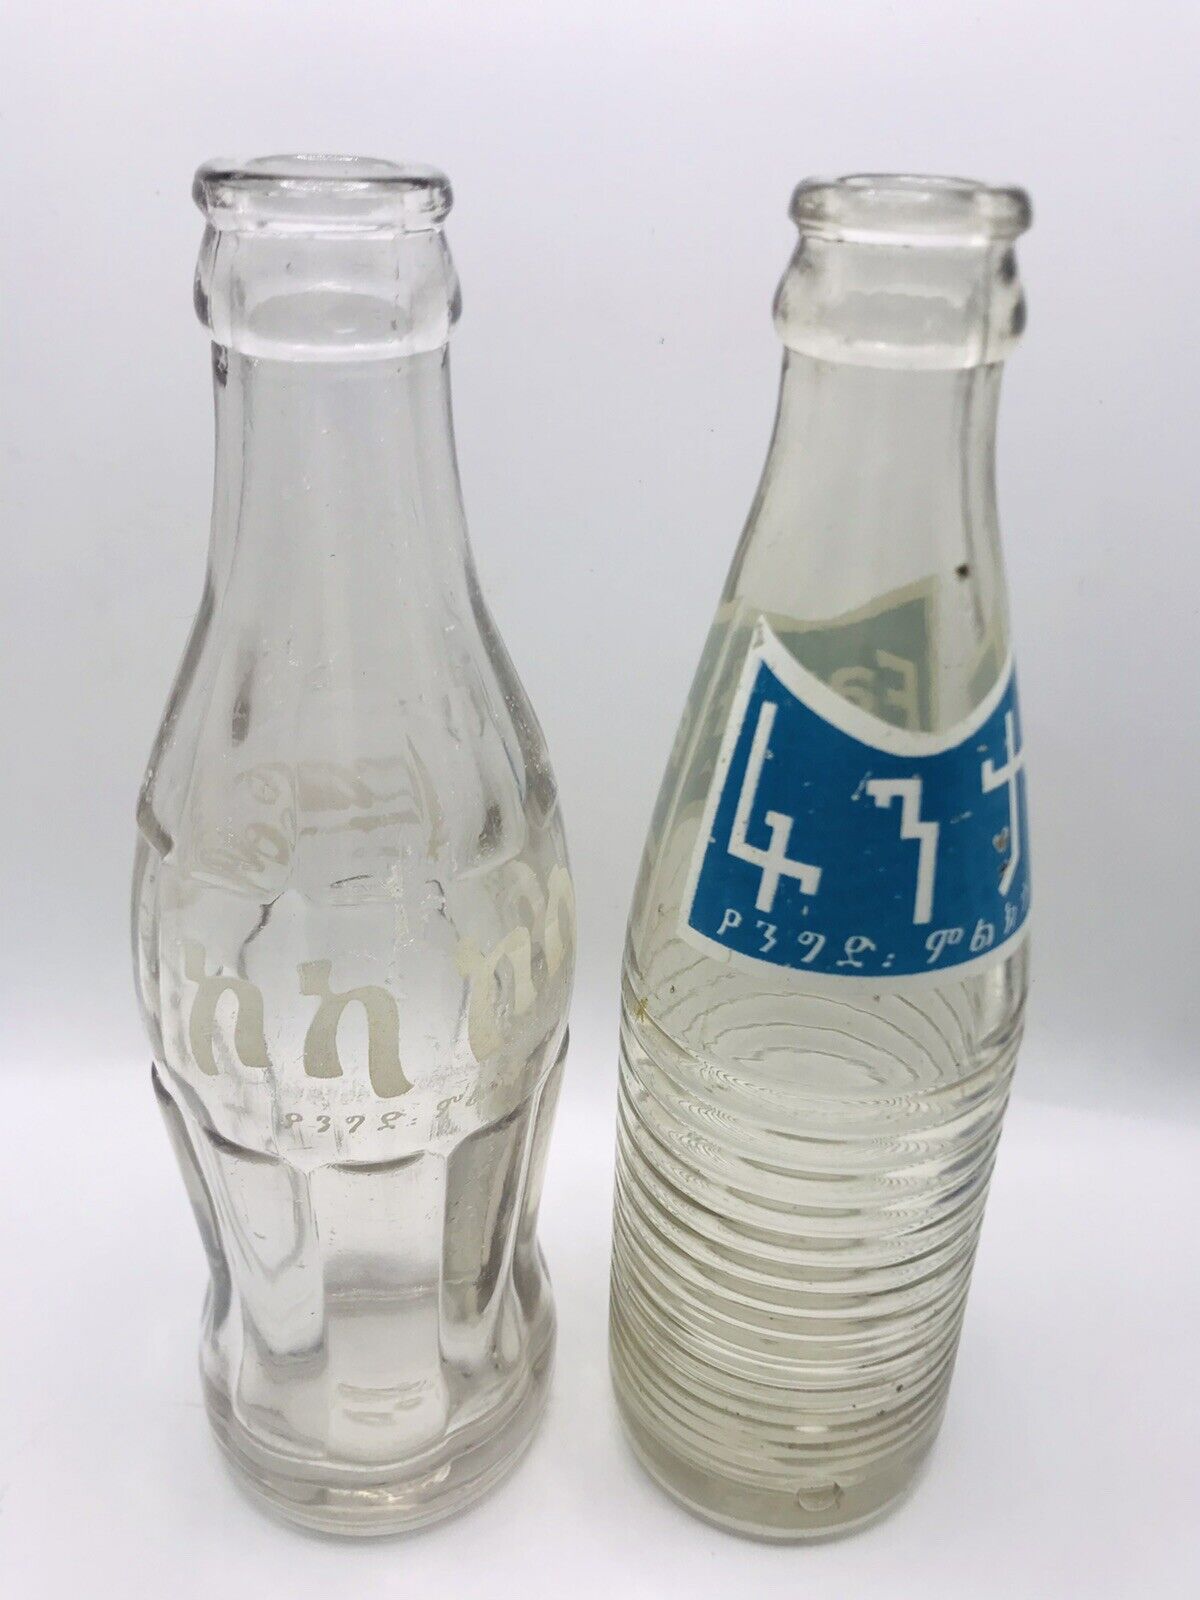 Rare Old Coca Cola & Fanta Bottles  from 1962&1974 Ethiopia Bottom Marked